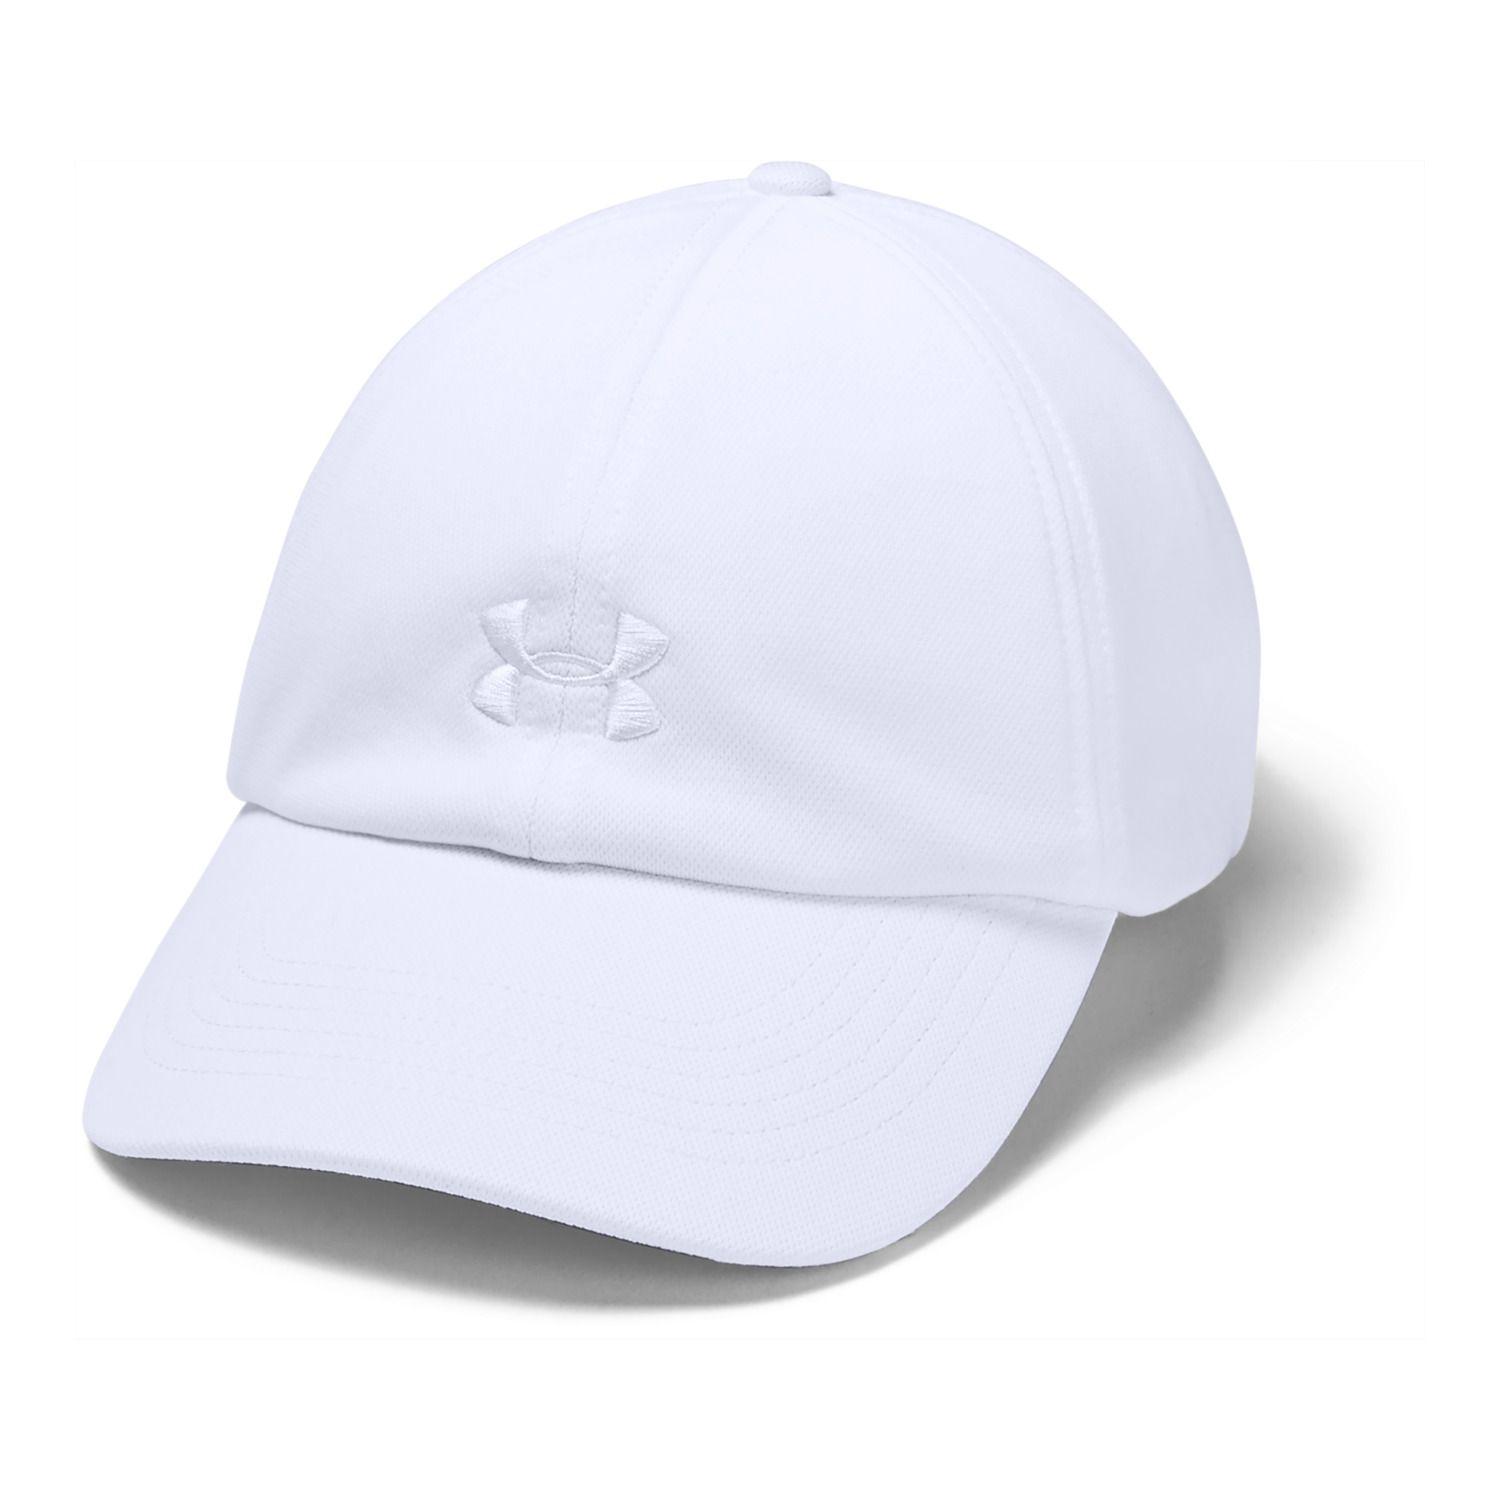 Womens Under Armour Hats - Accessories 